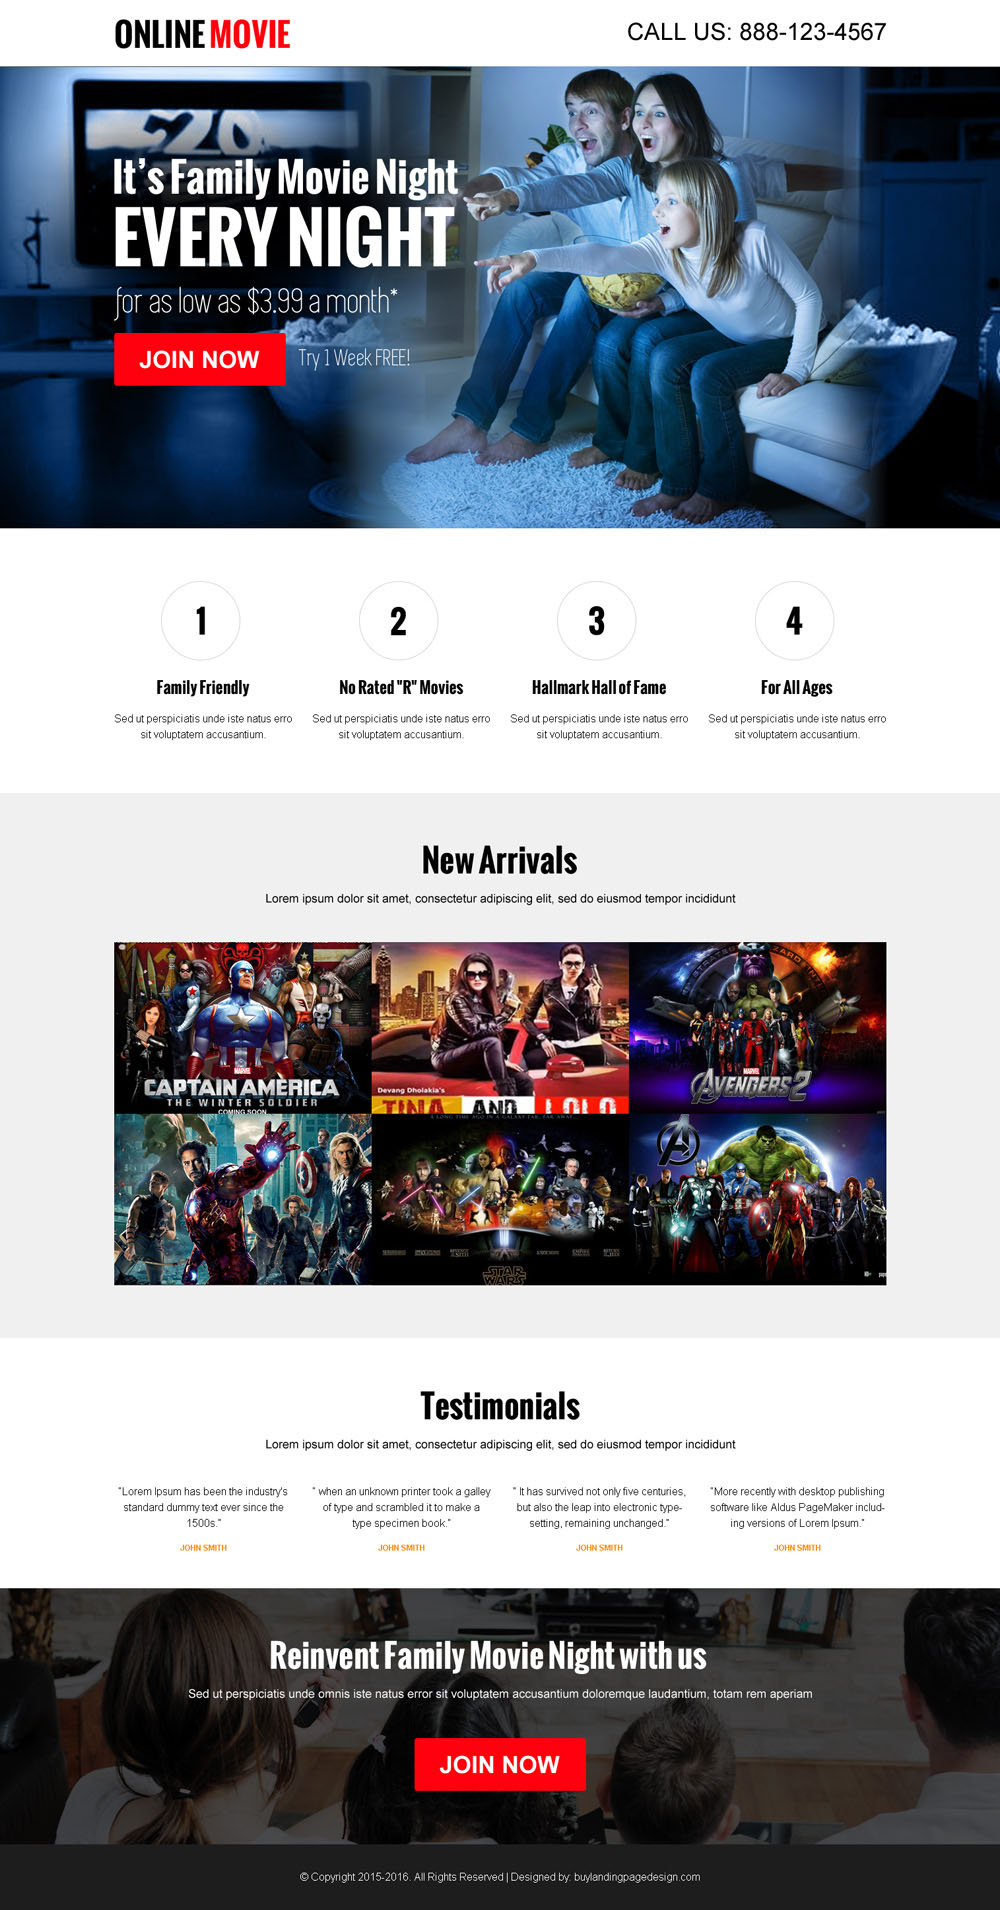 watch-movies-online-cta-landing-page-design-template-004